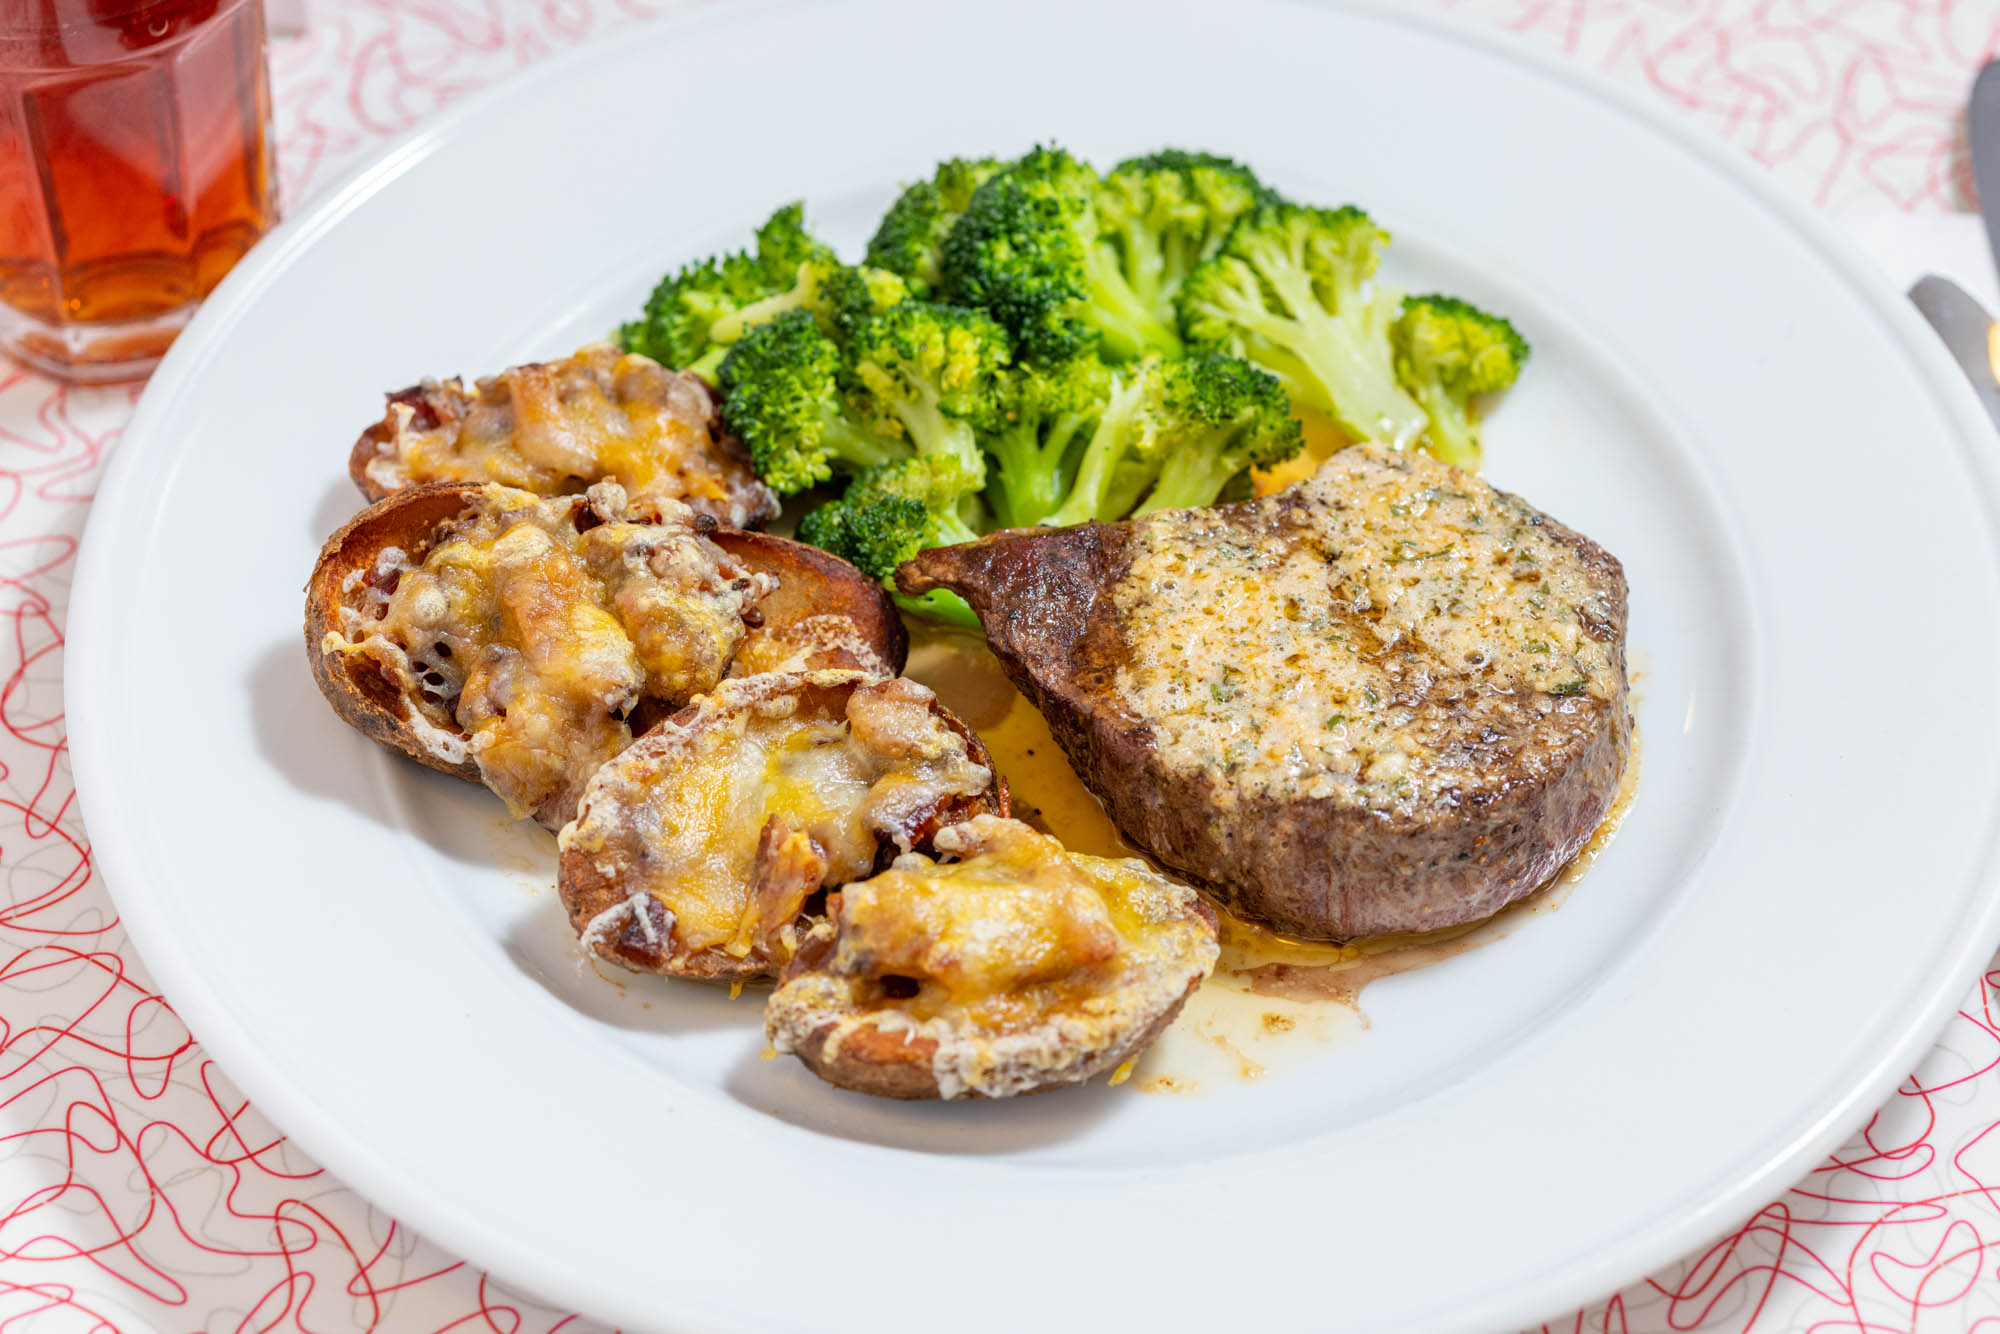 Filet Mignon with sides of potato skins and broccoli